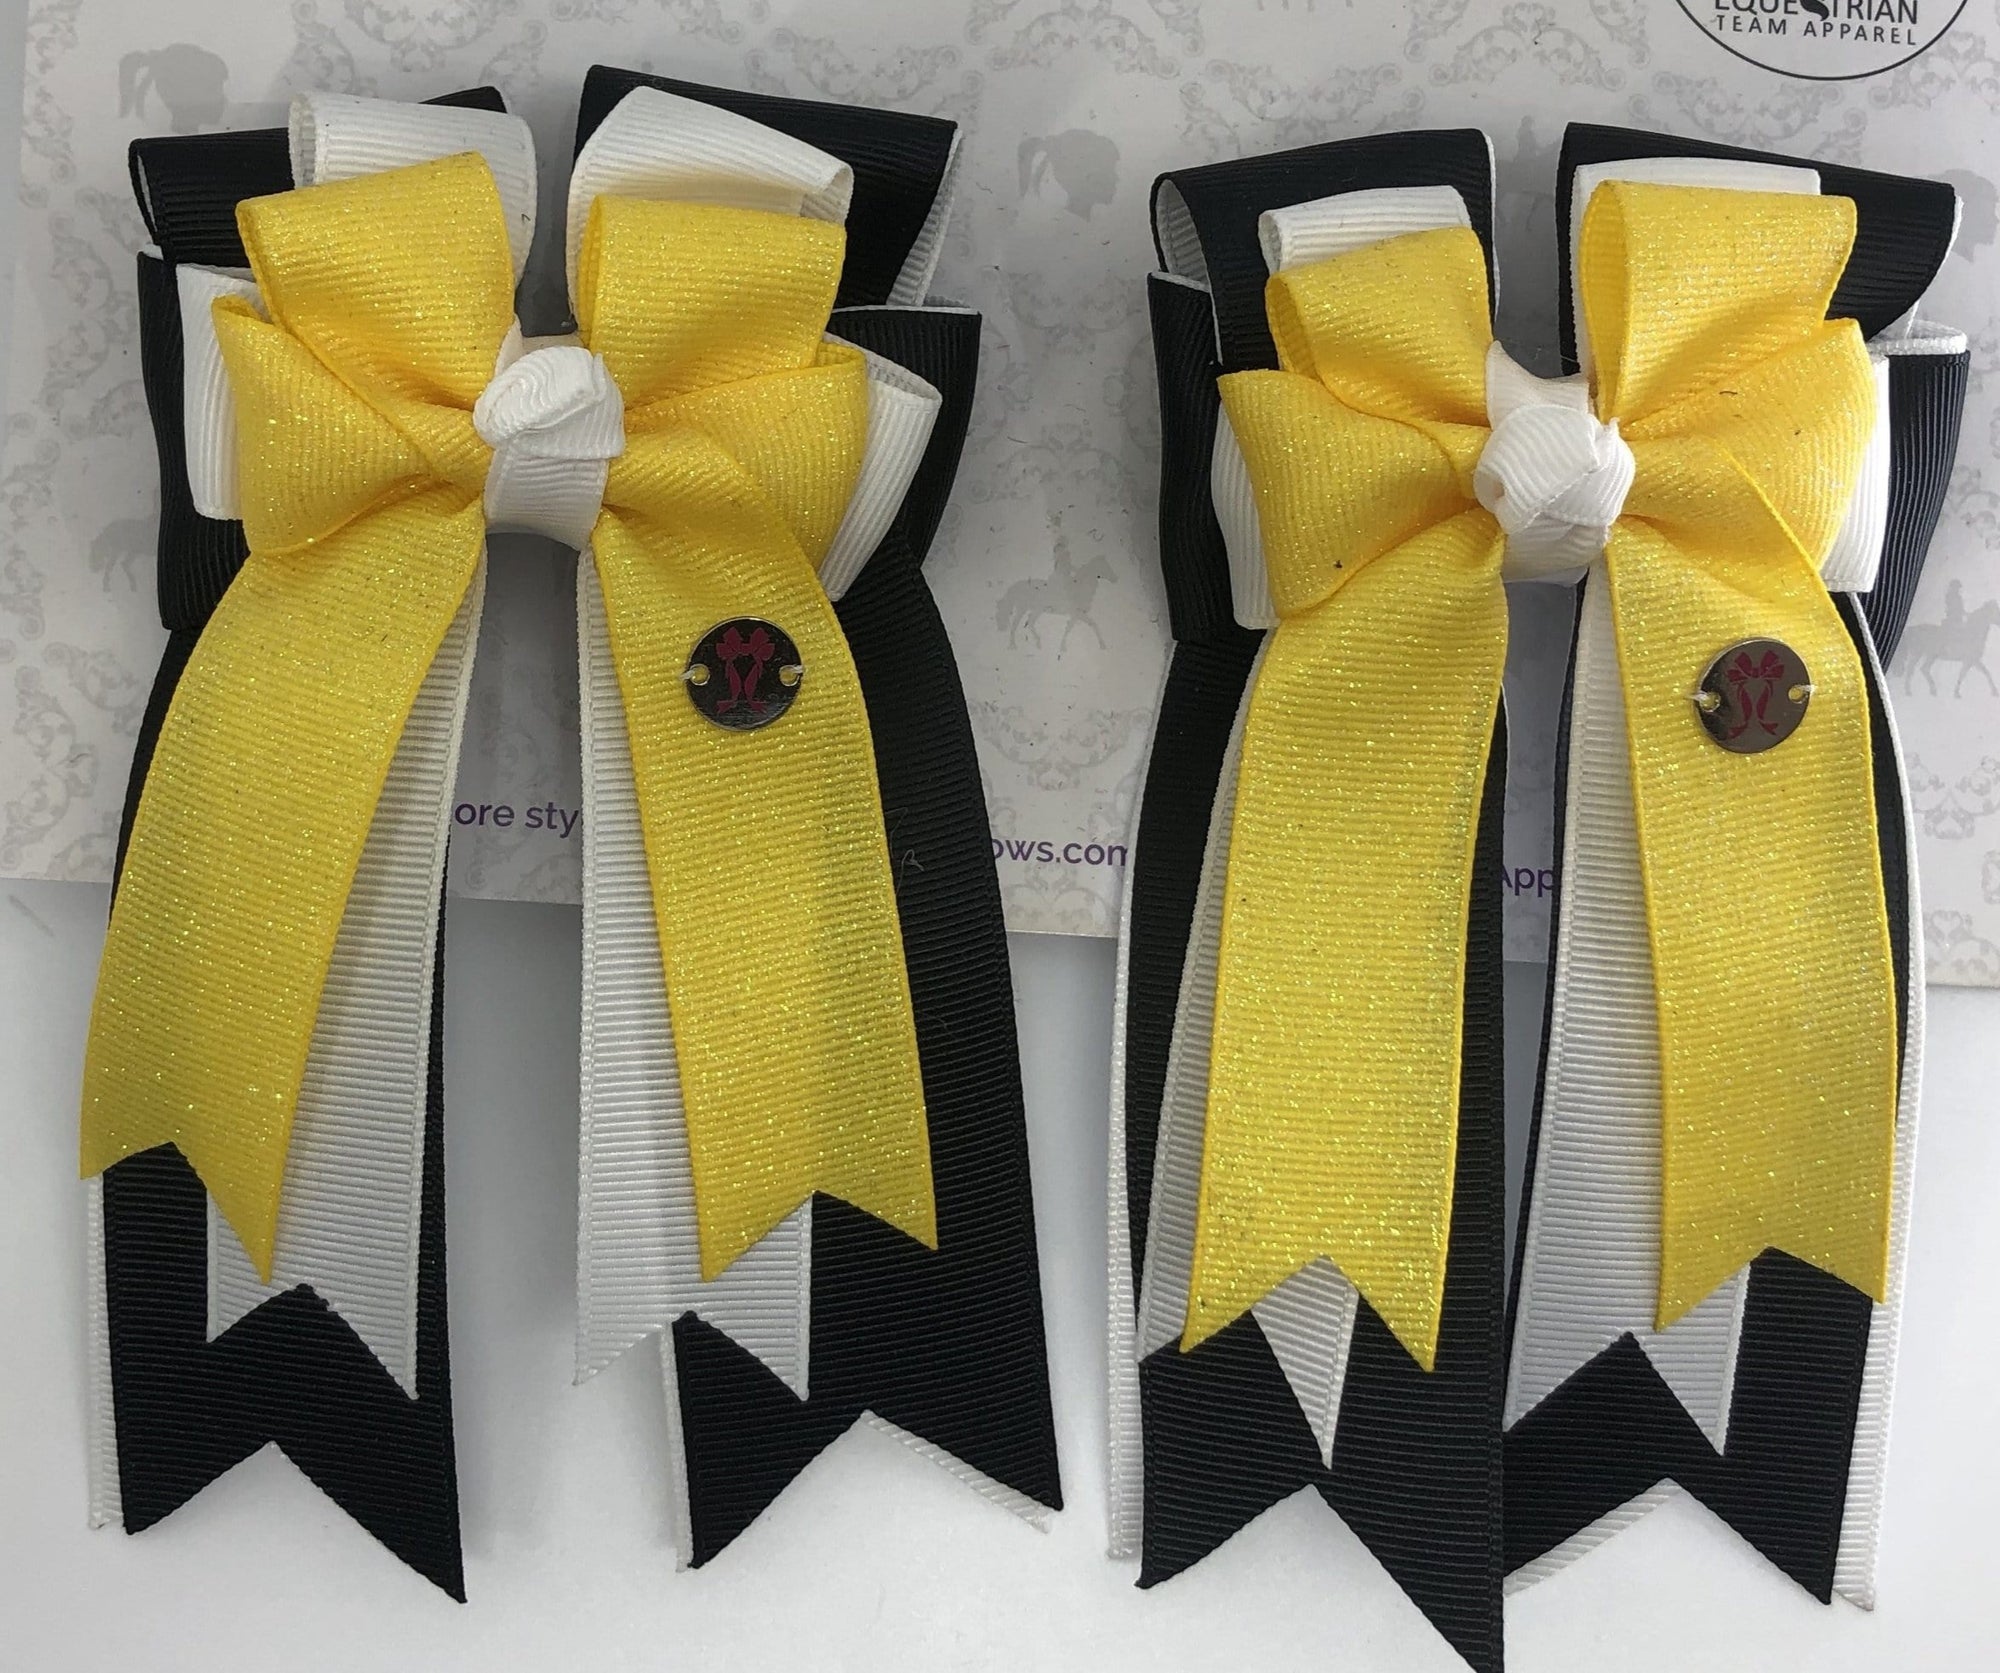 PonyTail Bows 3" Tails Chasebelly PonyTail Bows equestrian team apparel online tack store mobile tack store custom farm apparel custom show stable clothing equestrian lifestyle horse show clothing riding clothes PonyTail Bows | Equestrian Hair Accessories horses equestrian tack store